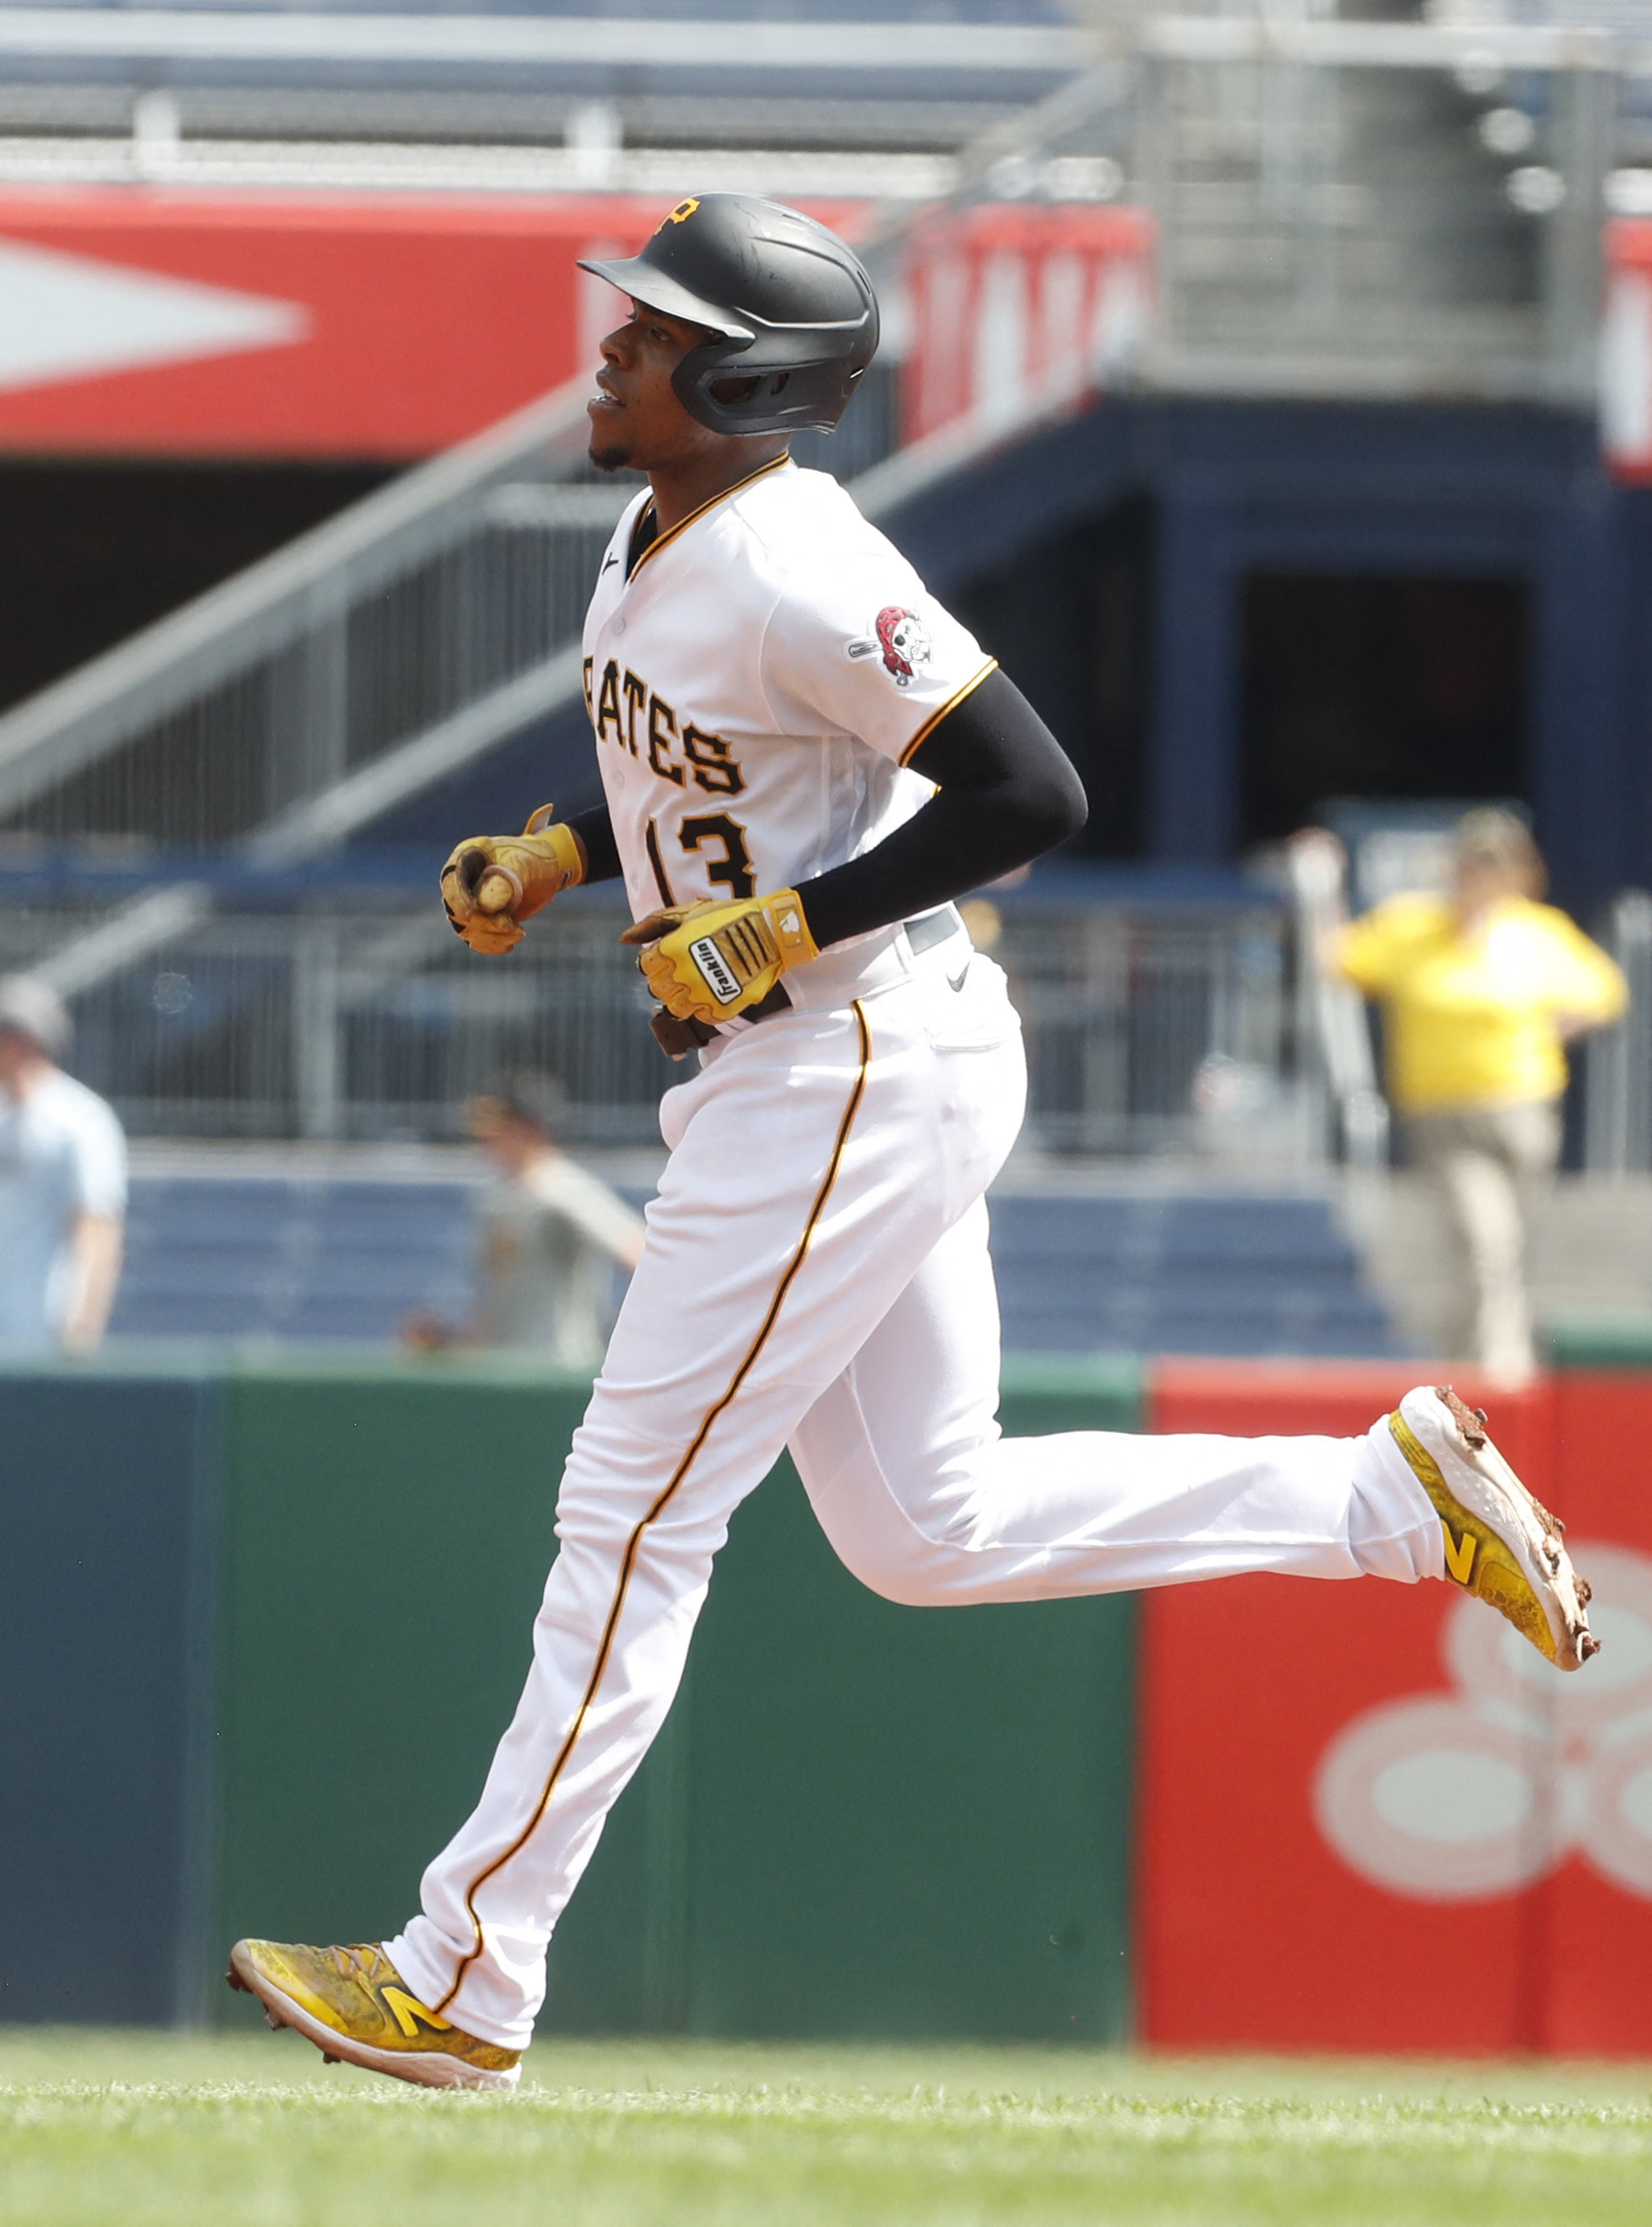 Pirates take series with 5-4 win over Brewers | Reuters